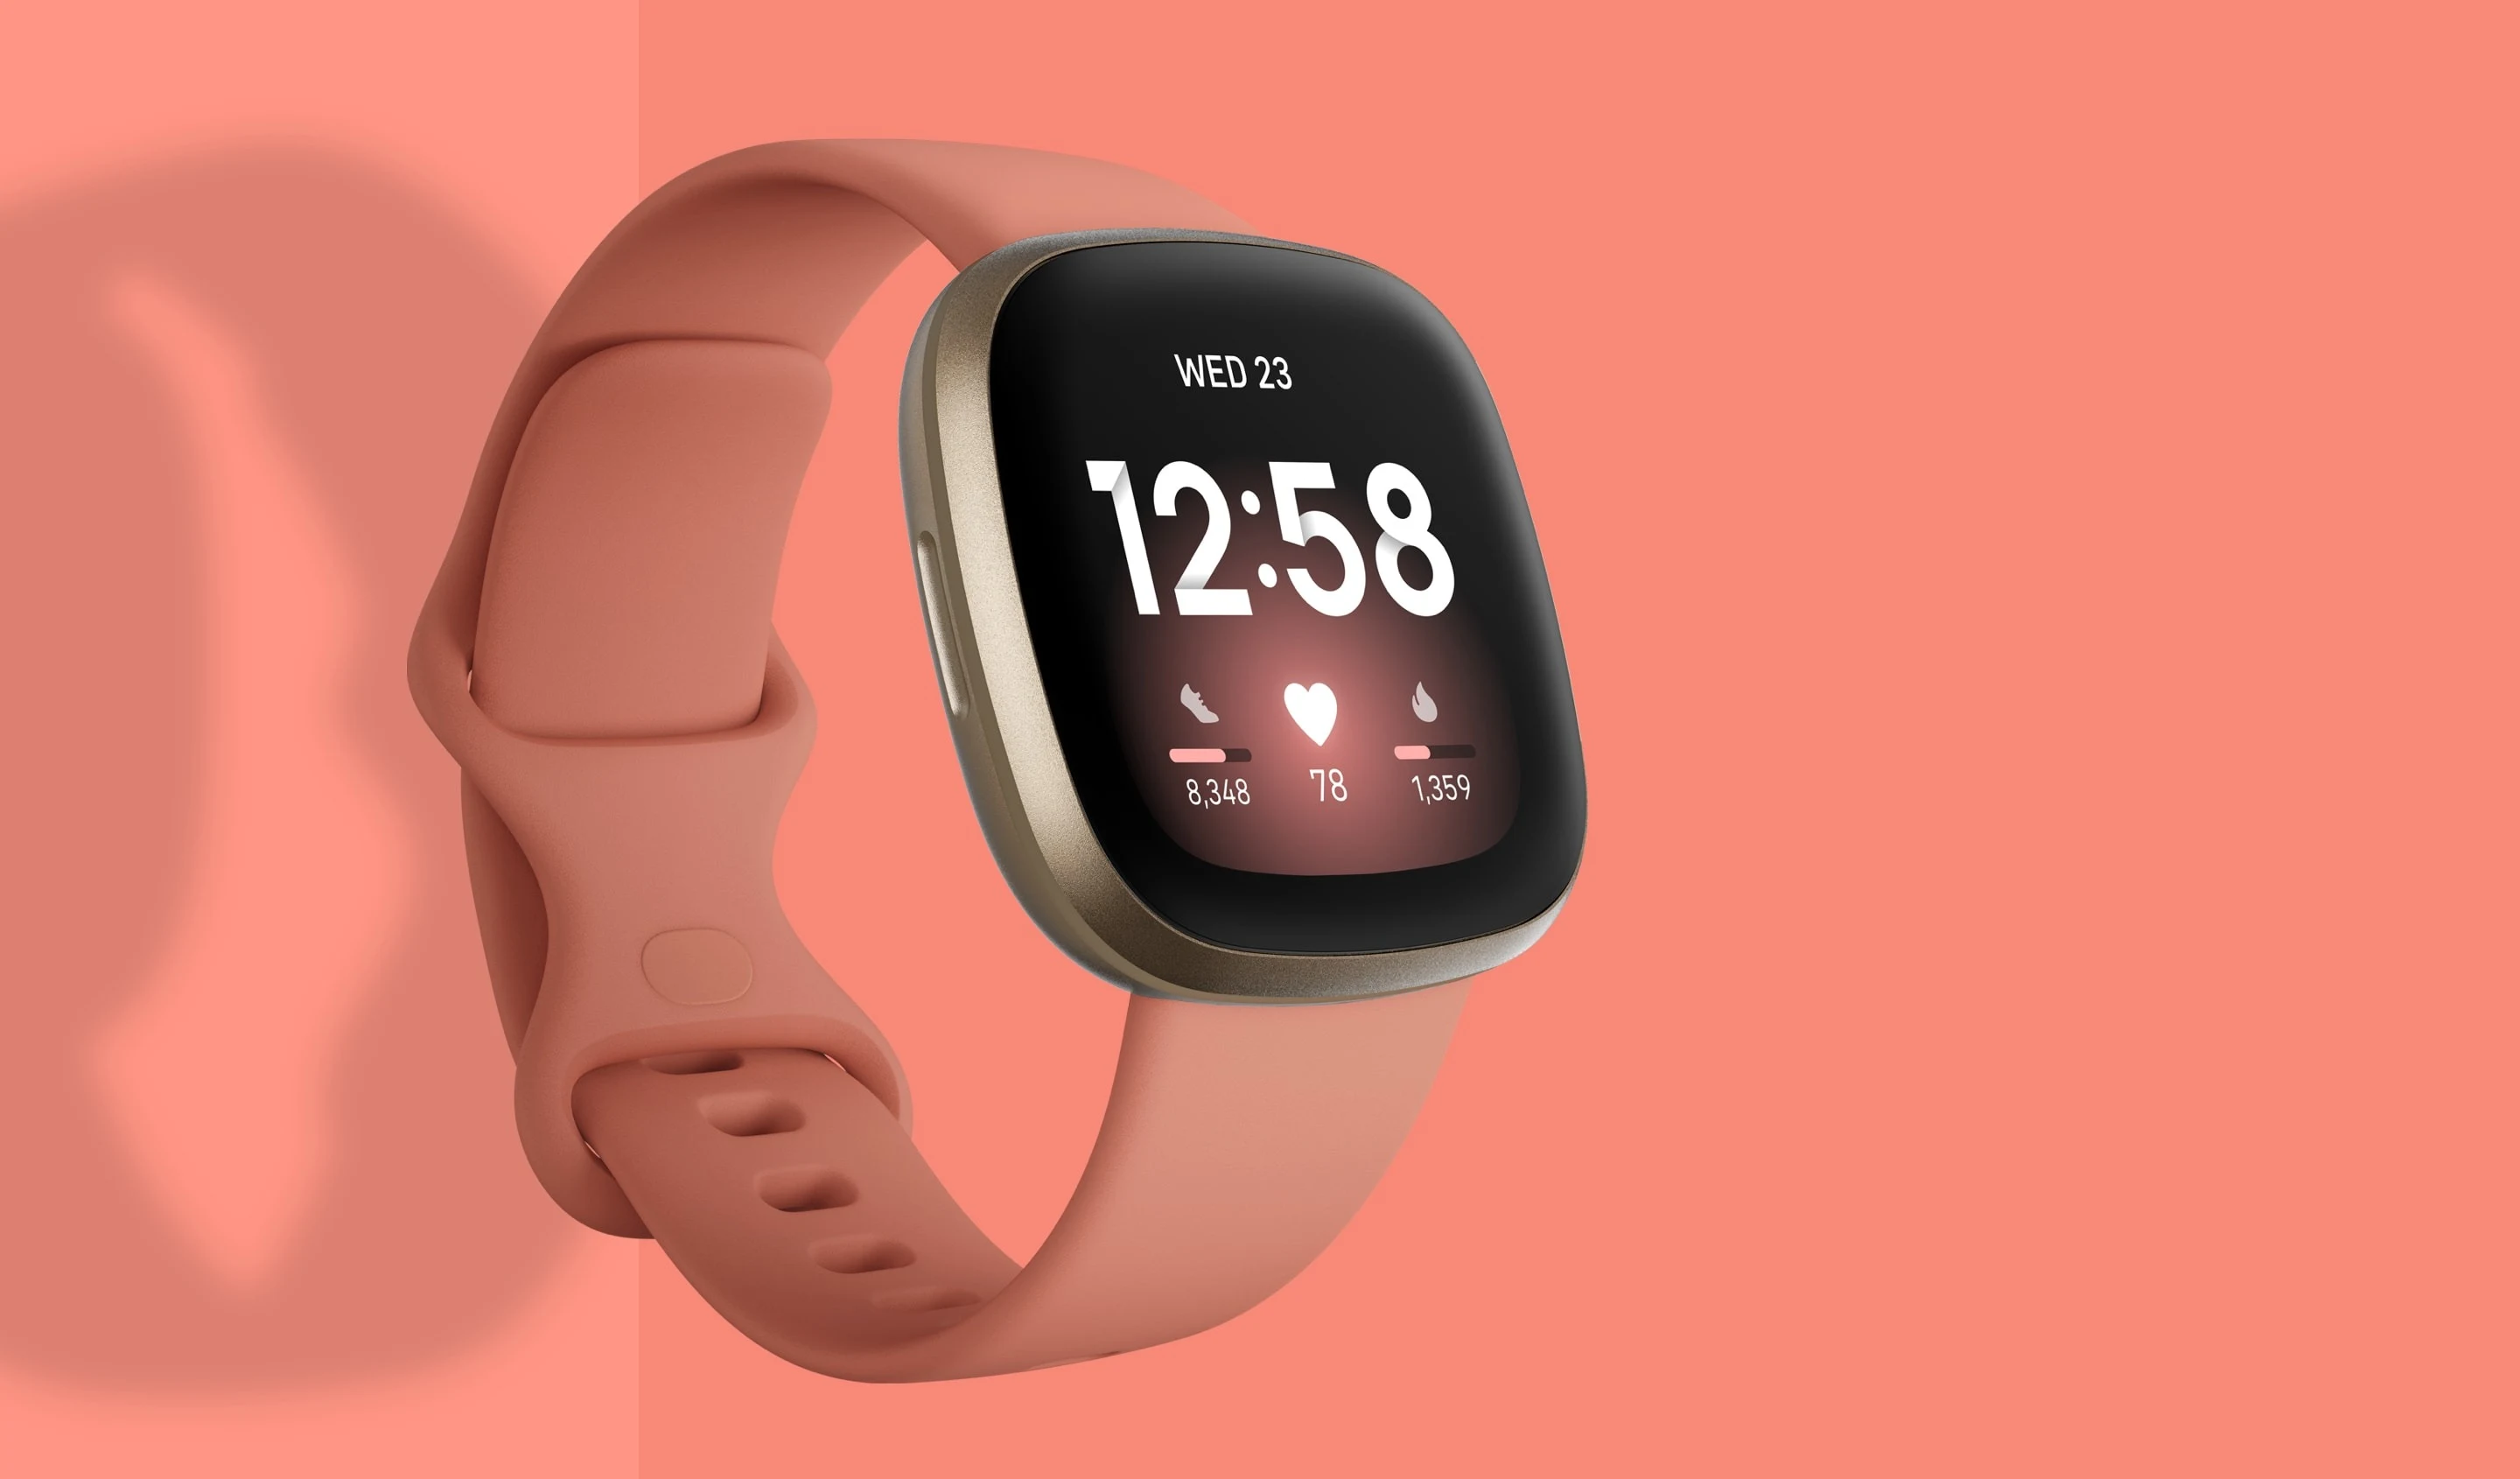 Fitbit has made significant changes to its market presence and product lineup.